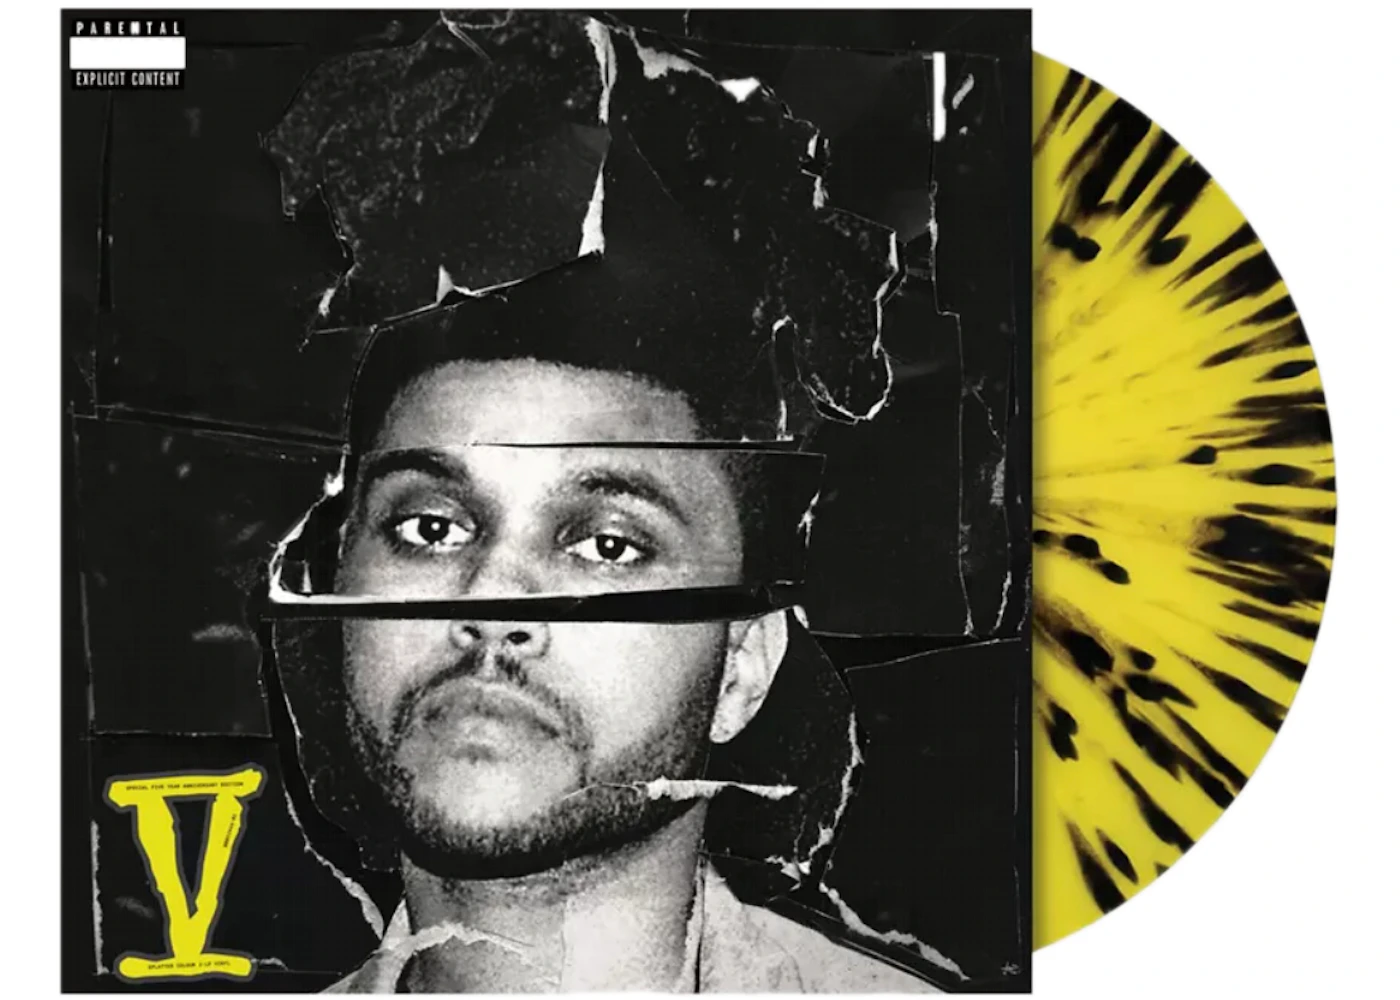 The Weeknd Beauty Behind The Madness Limited Edition 2XLP Vinyl